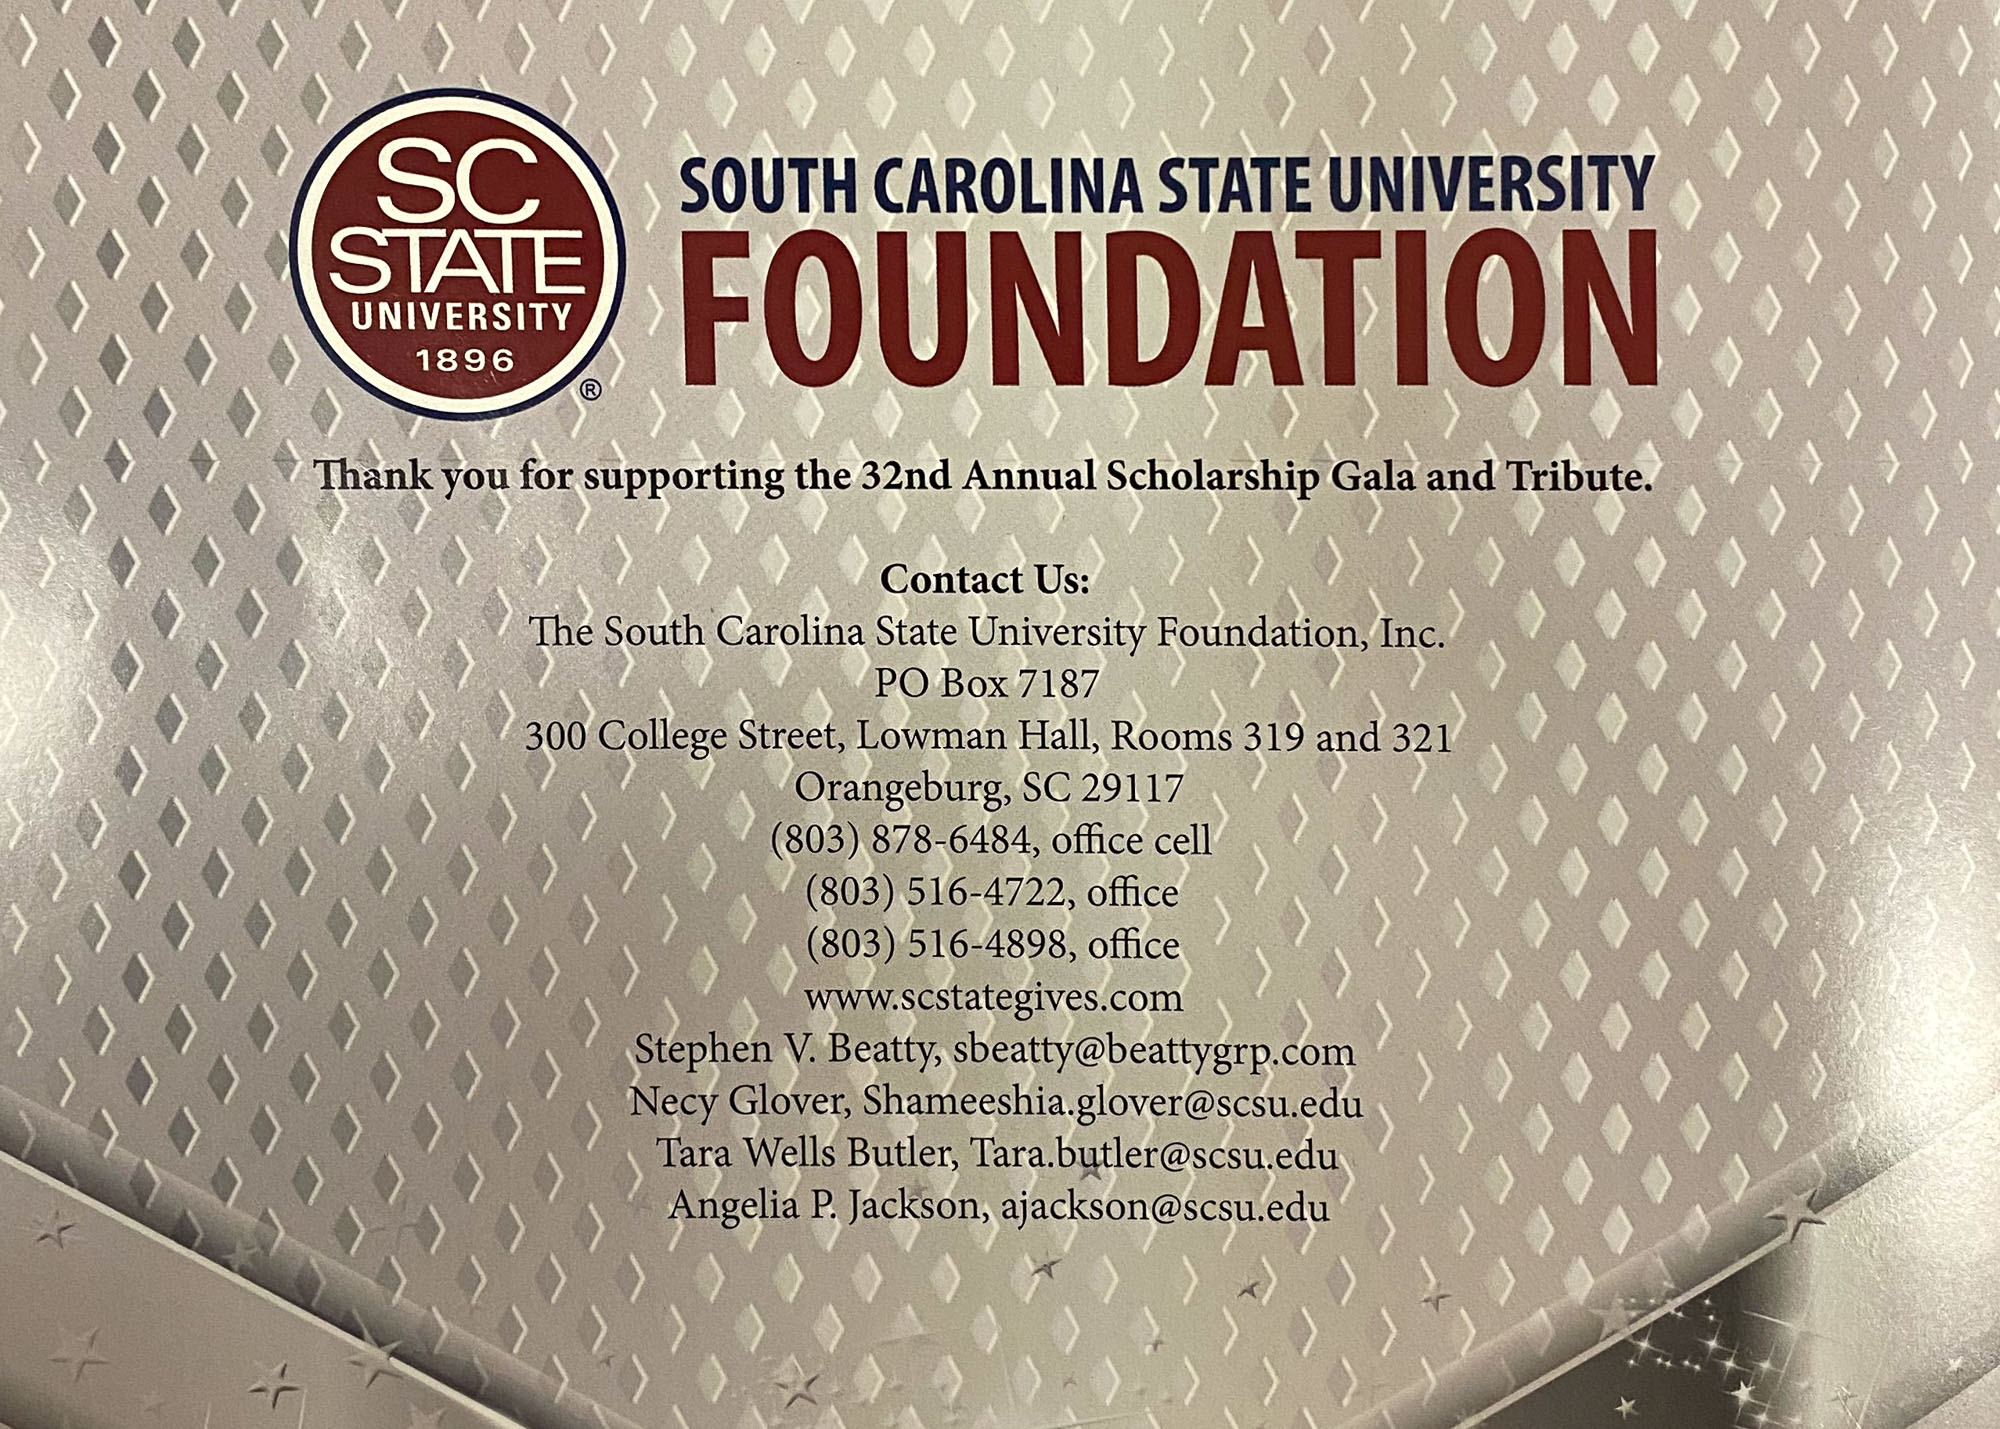 The cover of the south carolina state university foundation.